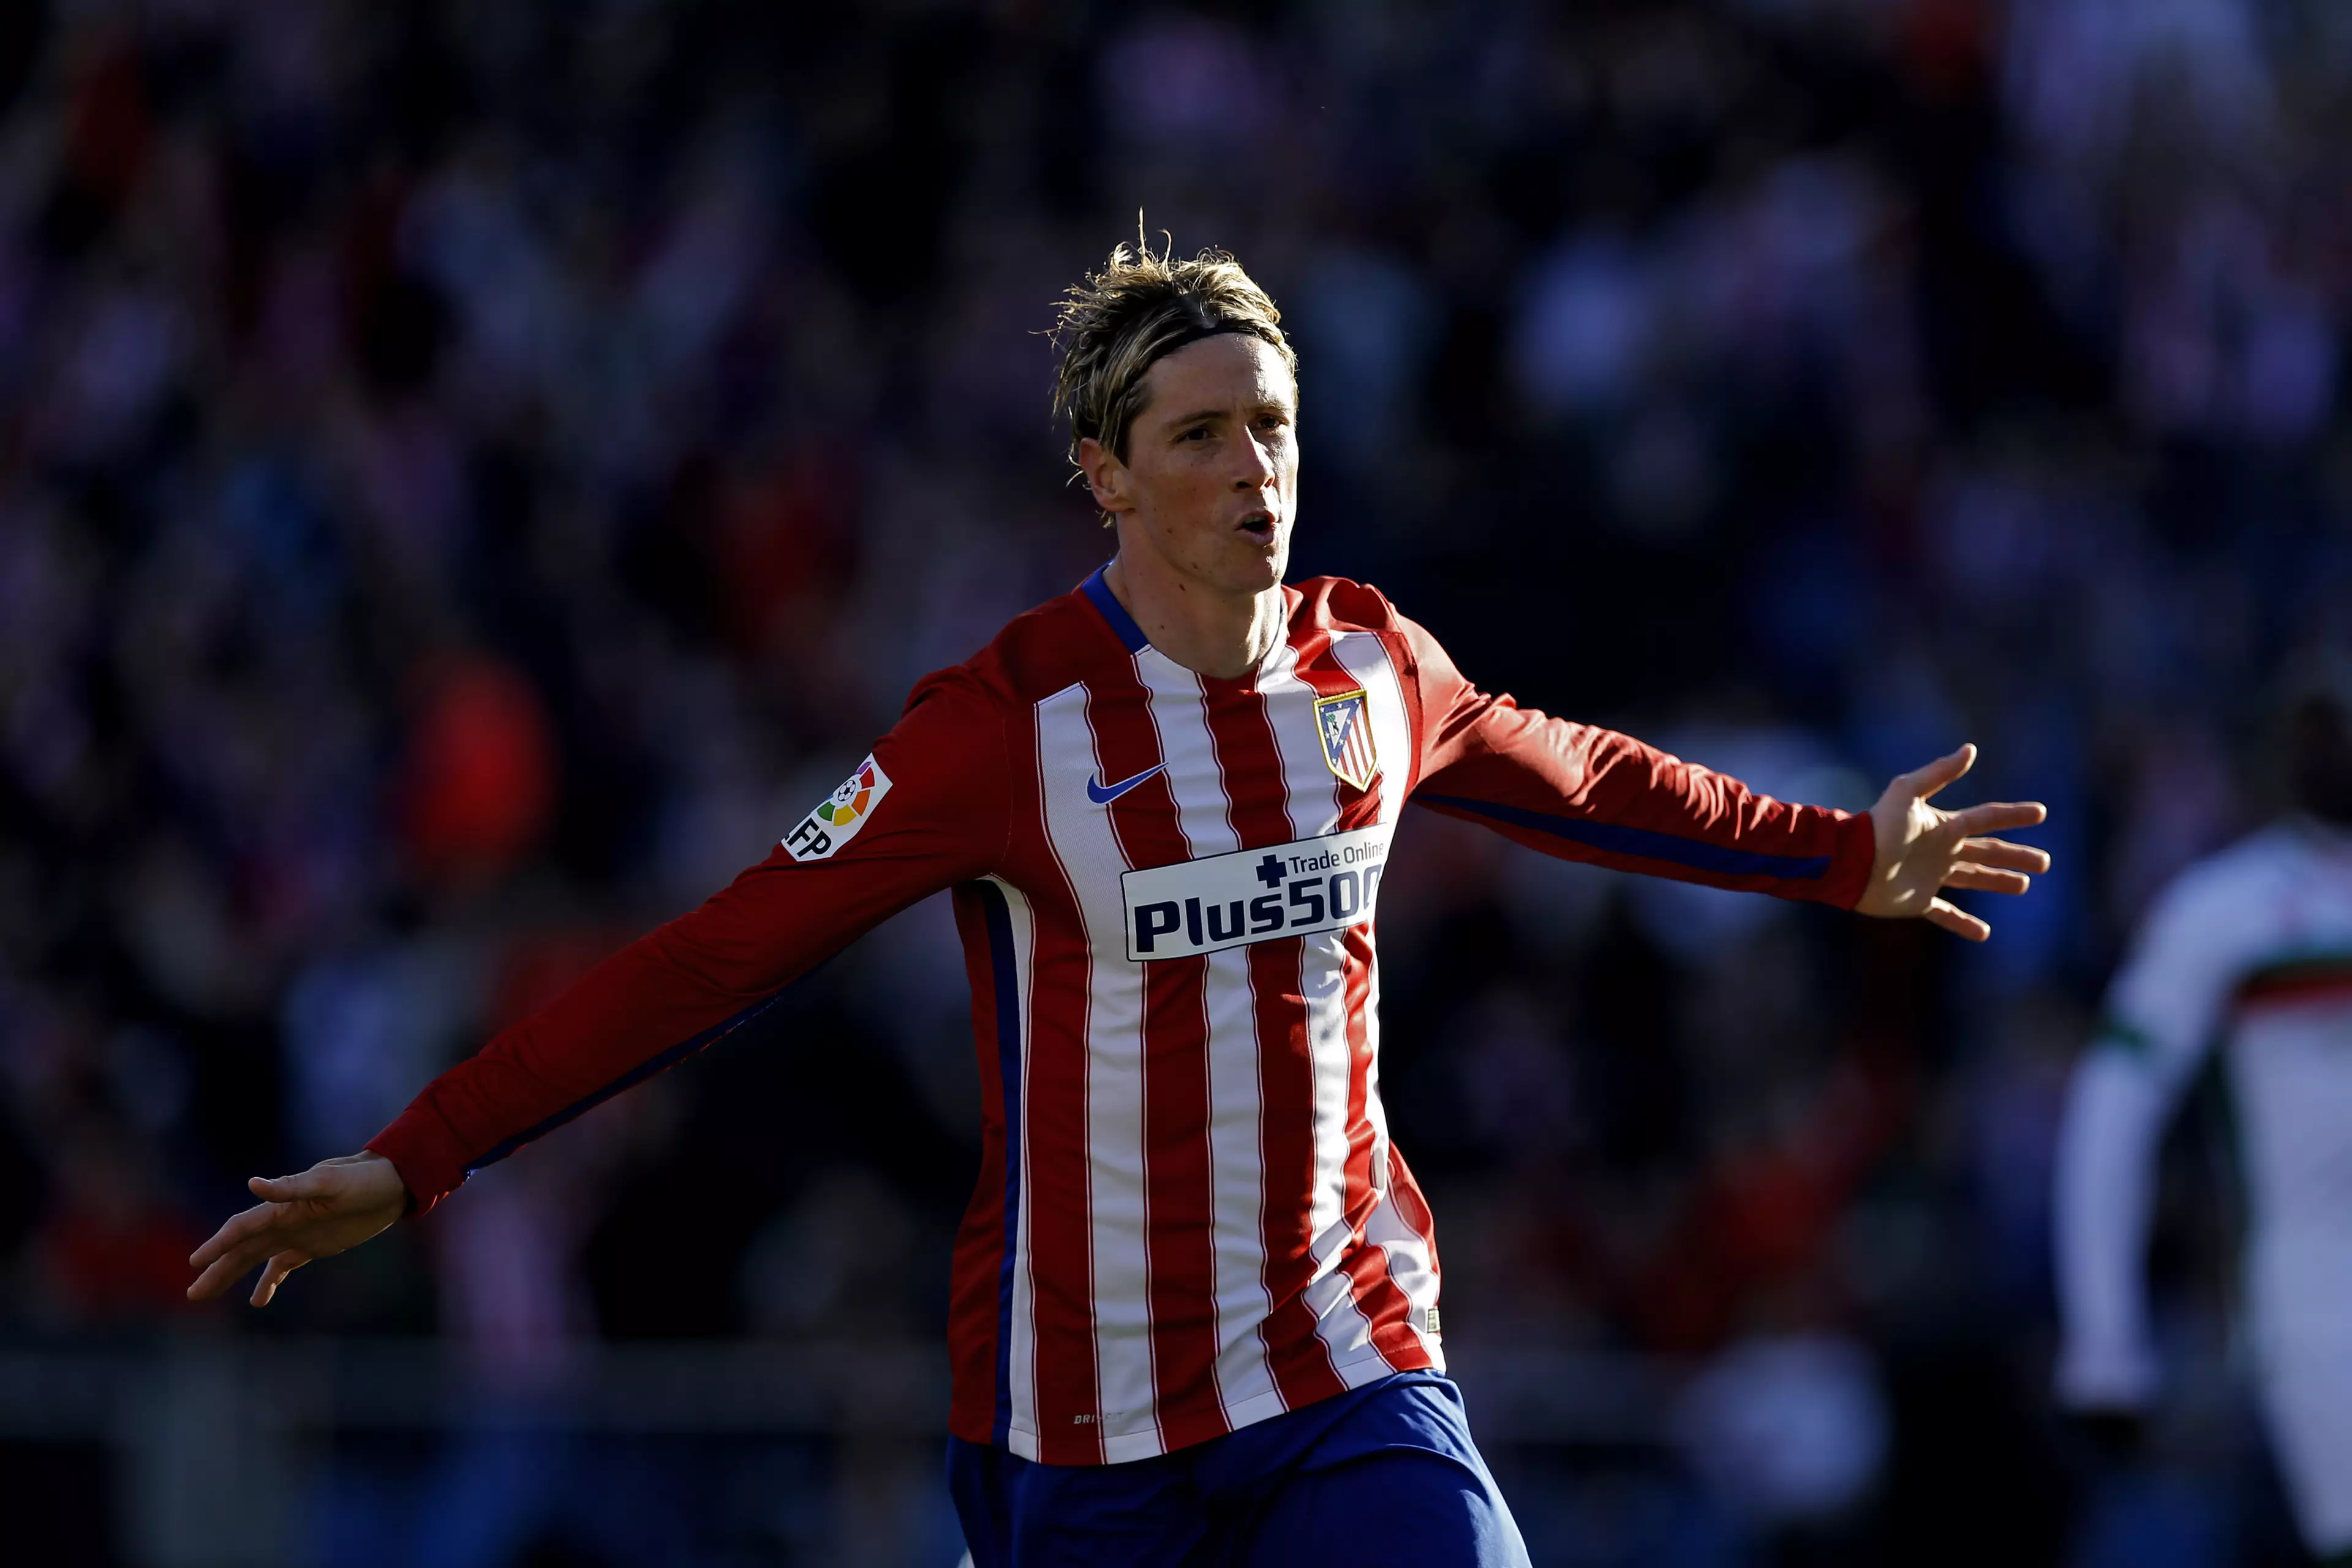 Fernando Torres Has Just Equalled One Of His Old Liverpool Records